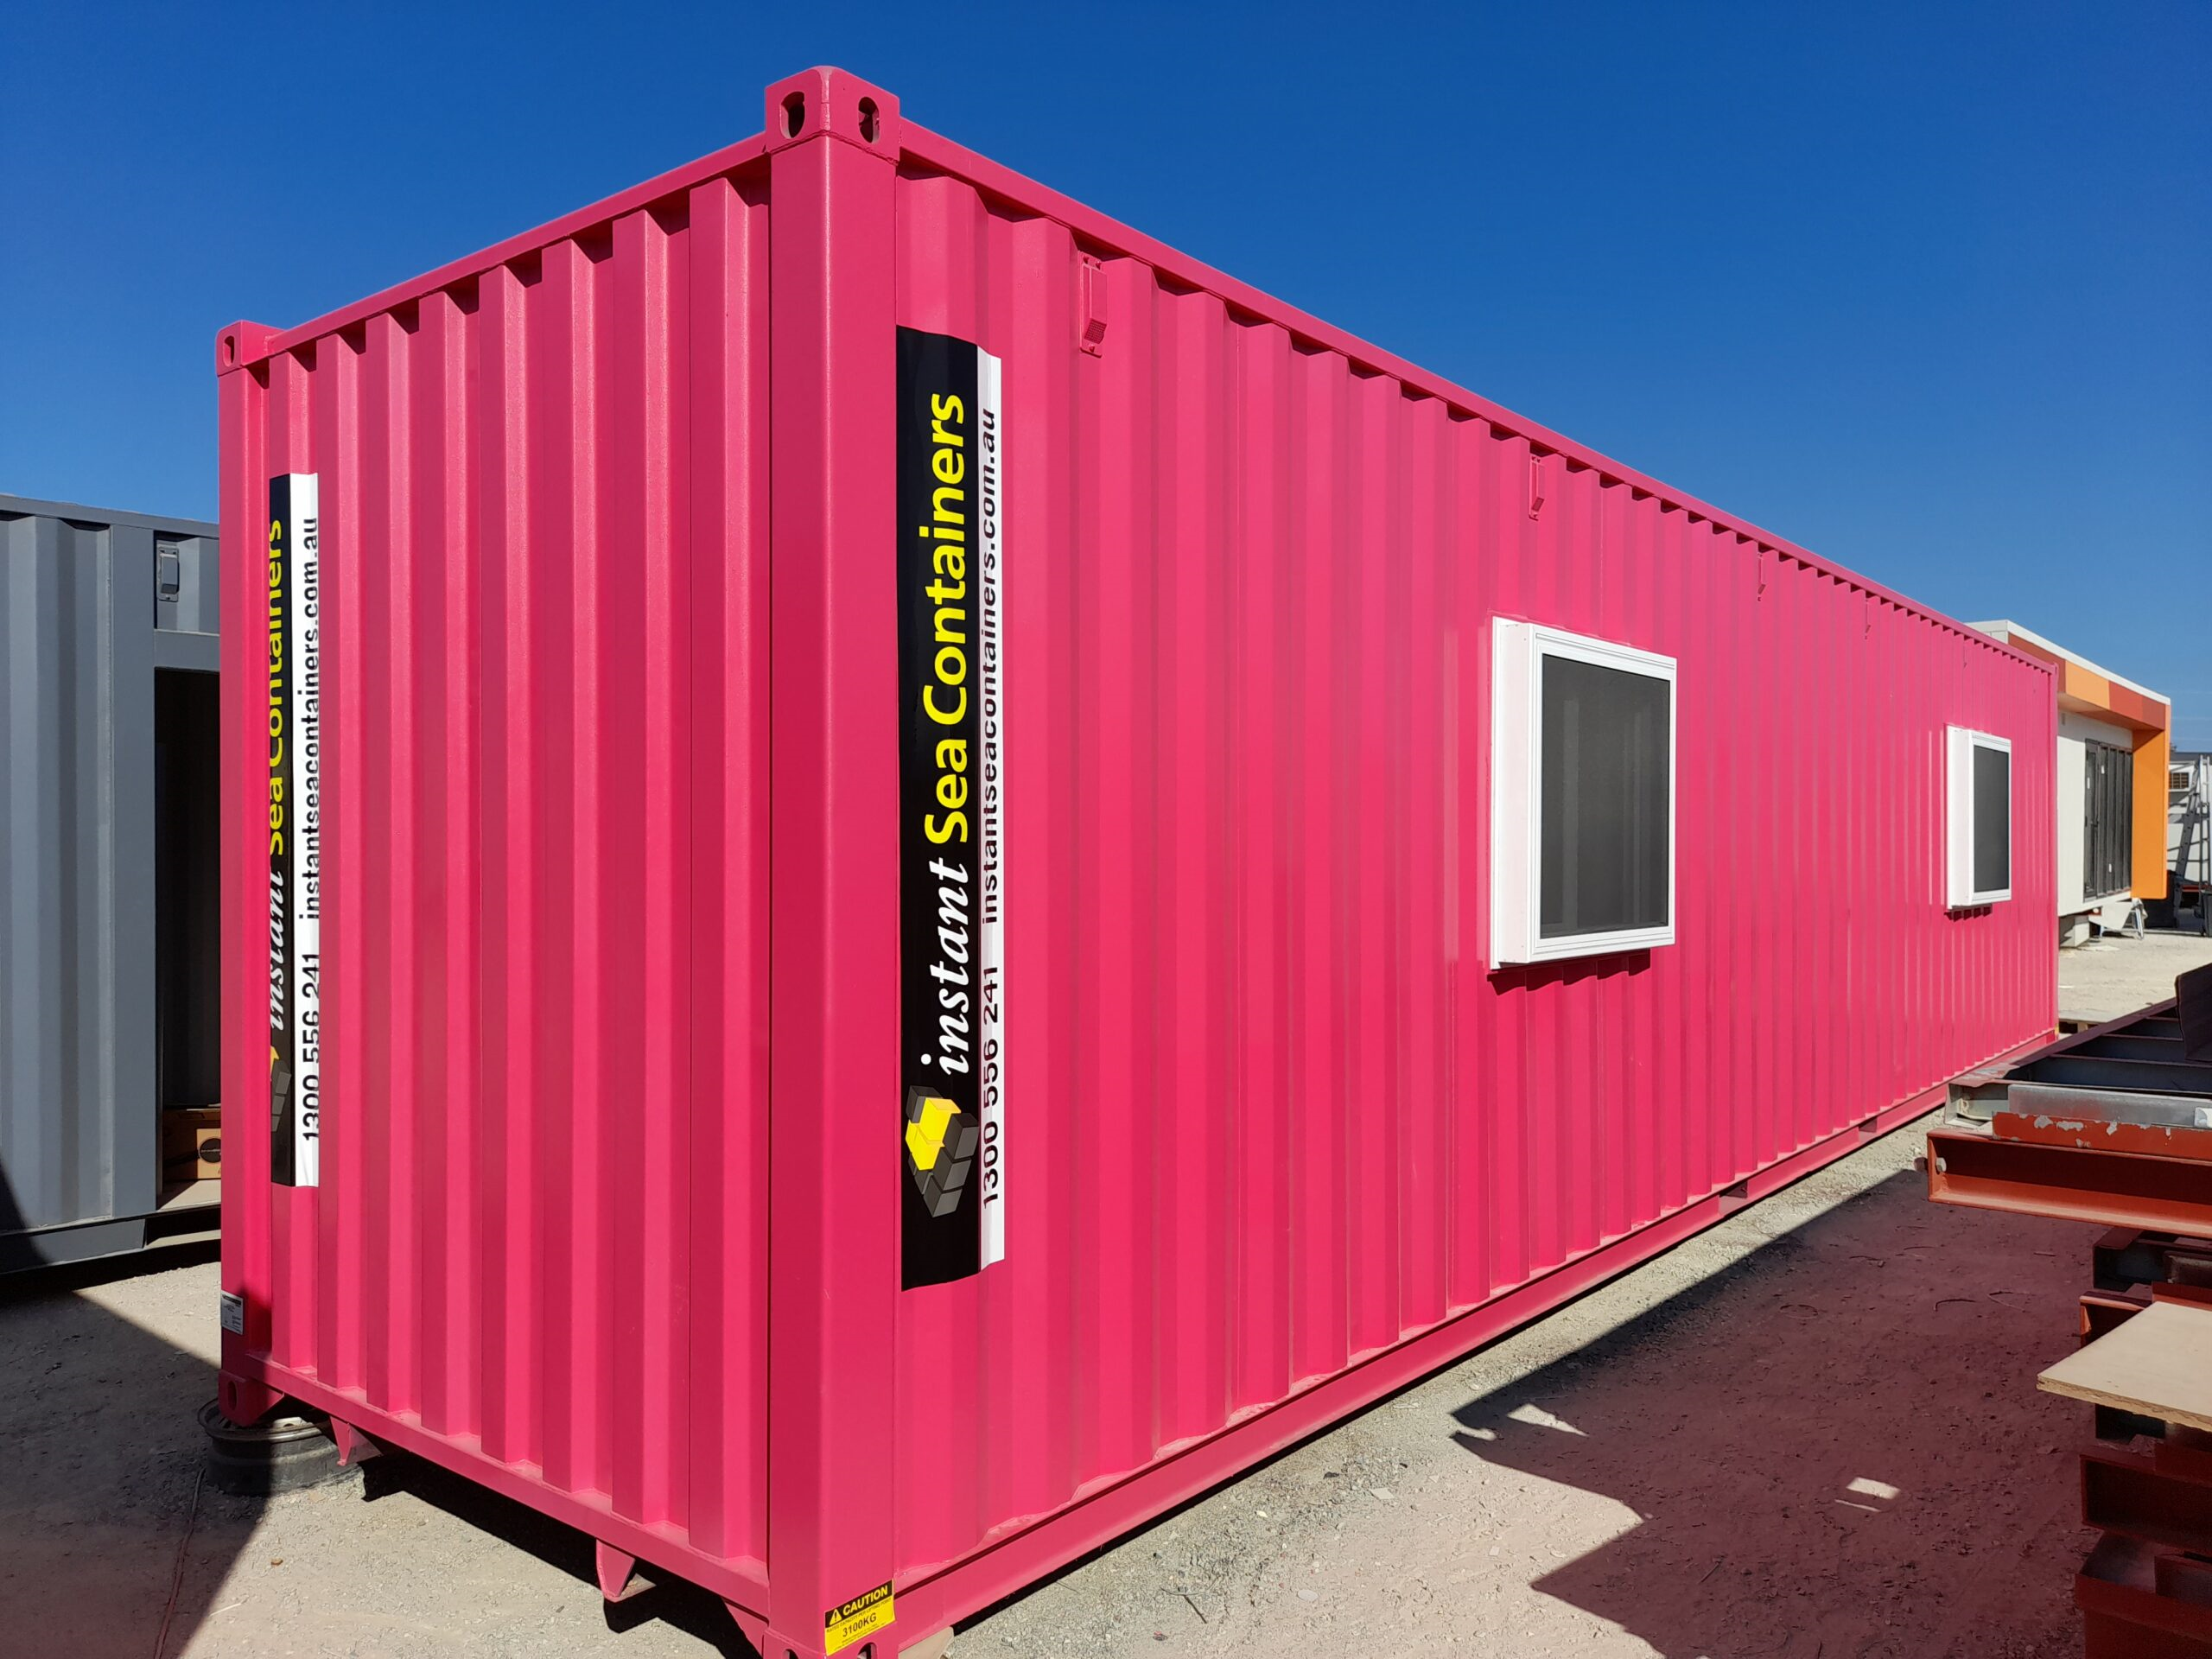 Bright pink shipping container converted into an office space with two white framed windows, set on a construction site under a clear blue sky.